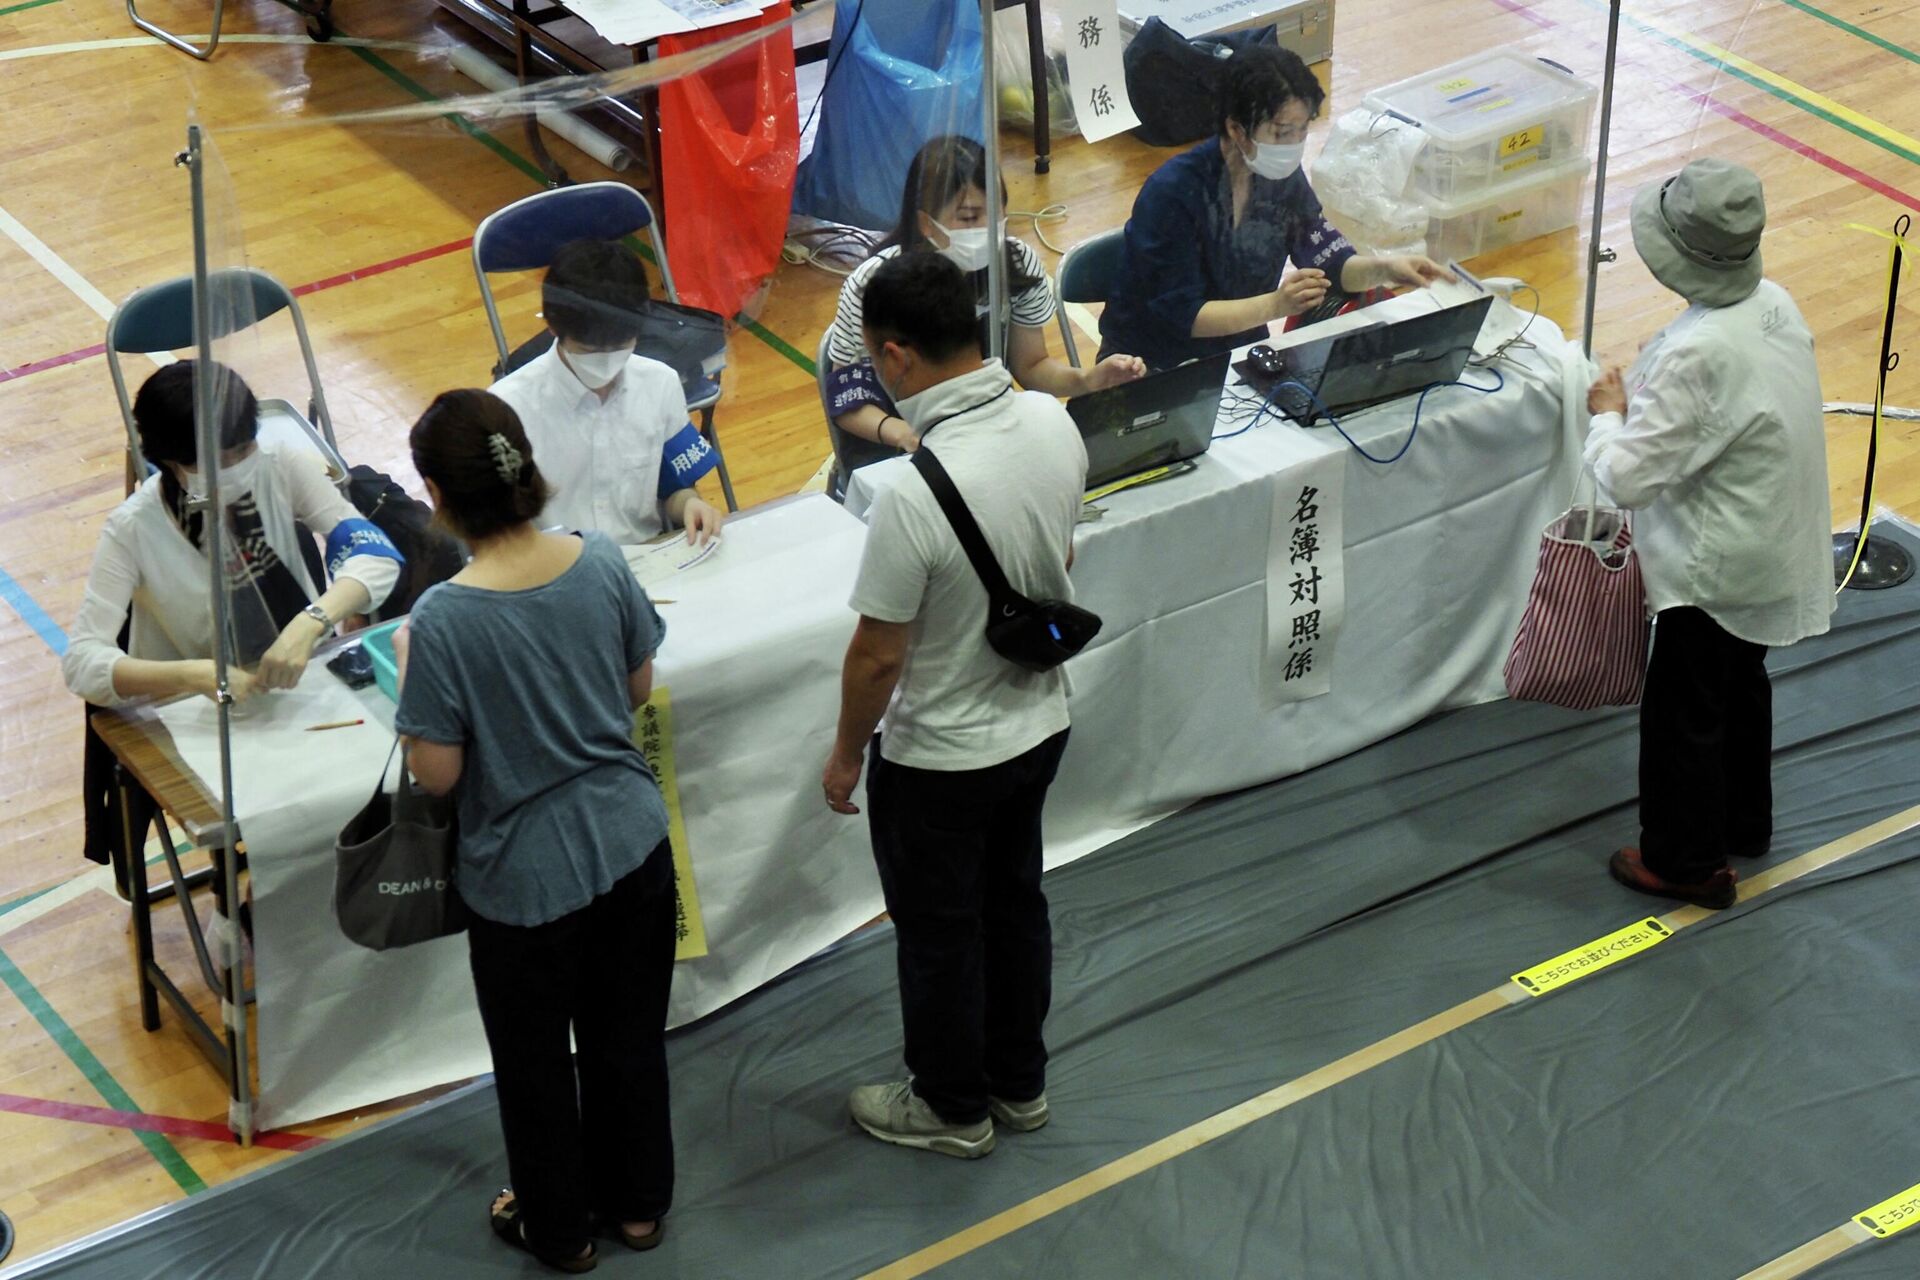 Voters receive their ballots during Japan's upper house election at a polling station in Tokyo on July 10, 2022. - Polls opened on July 10 in Japan's upper house elections, just two days after former prime minister Shinzo Abe was assassinated while on the campaign trail. - Sputnik International, 1920, 10.07.2022